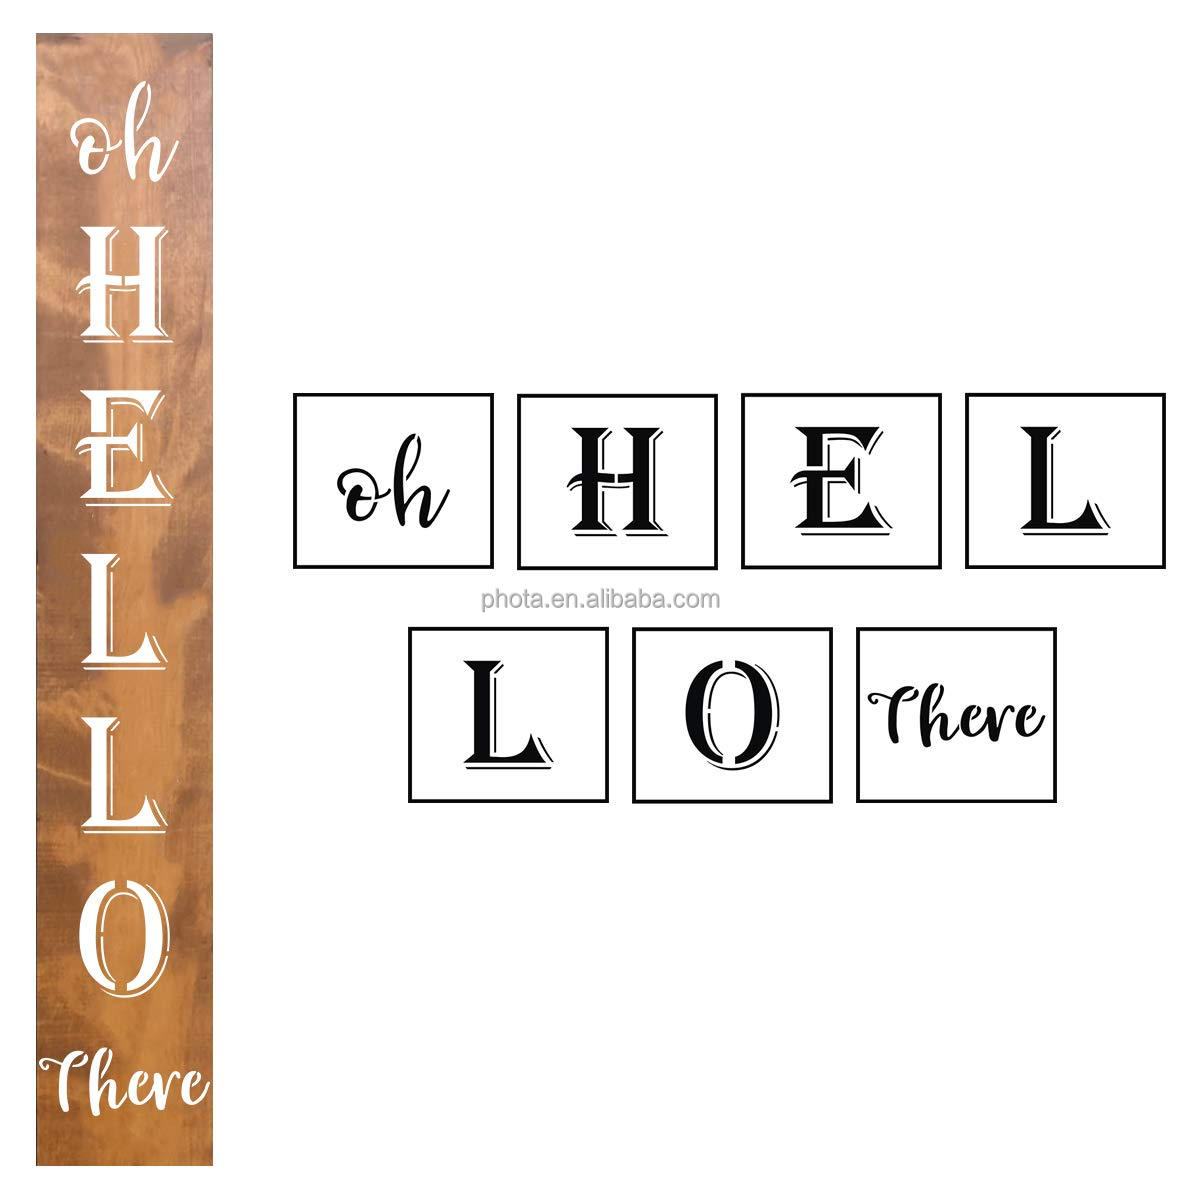 Oh Hello There Sign Stencils Templates for Painting on Wood, Reusable Letter Stencils for Front Door Porch Wood Signs